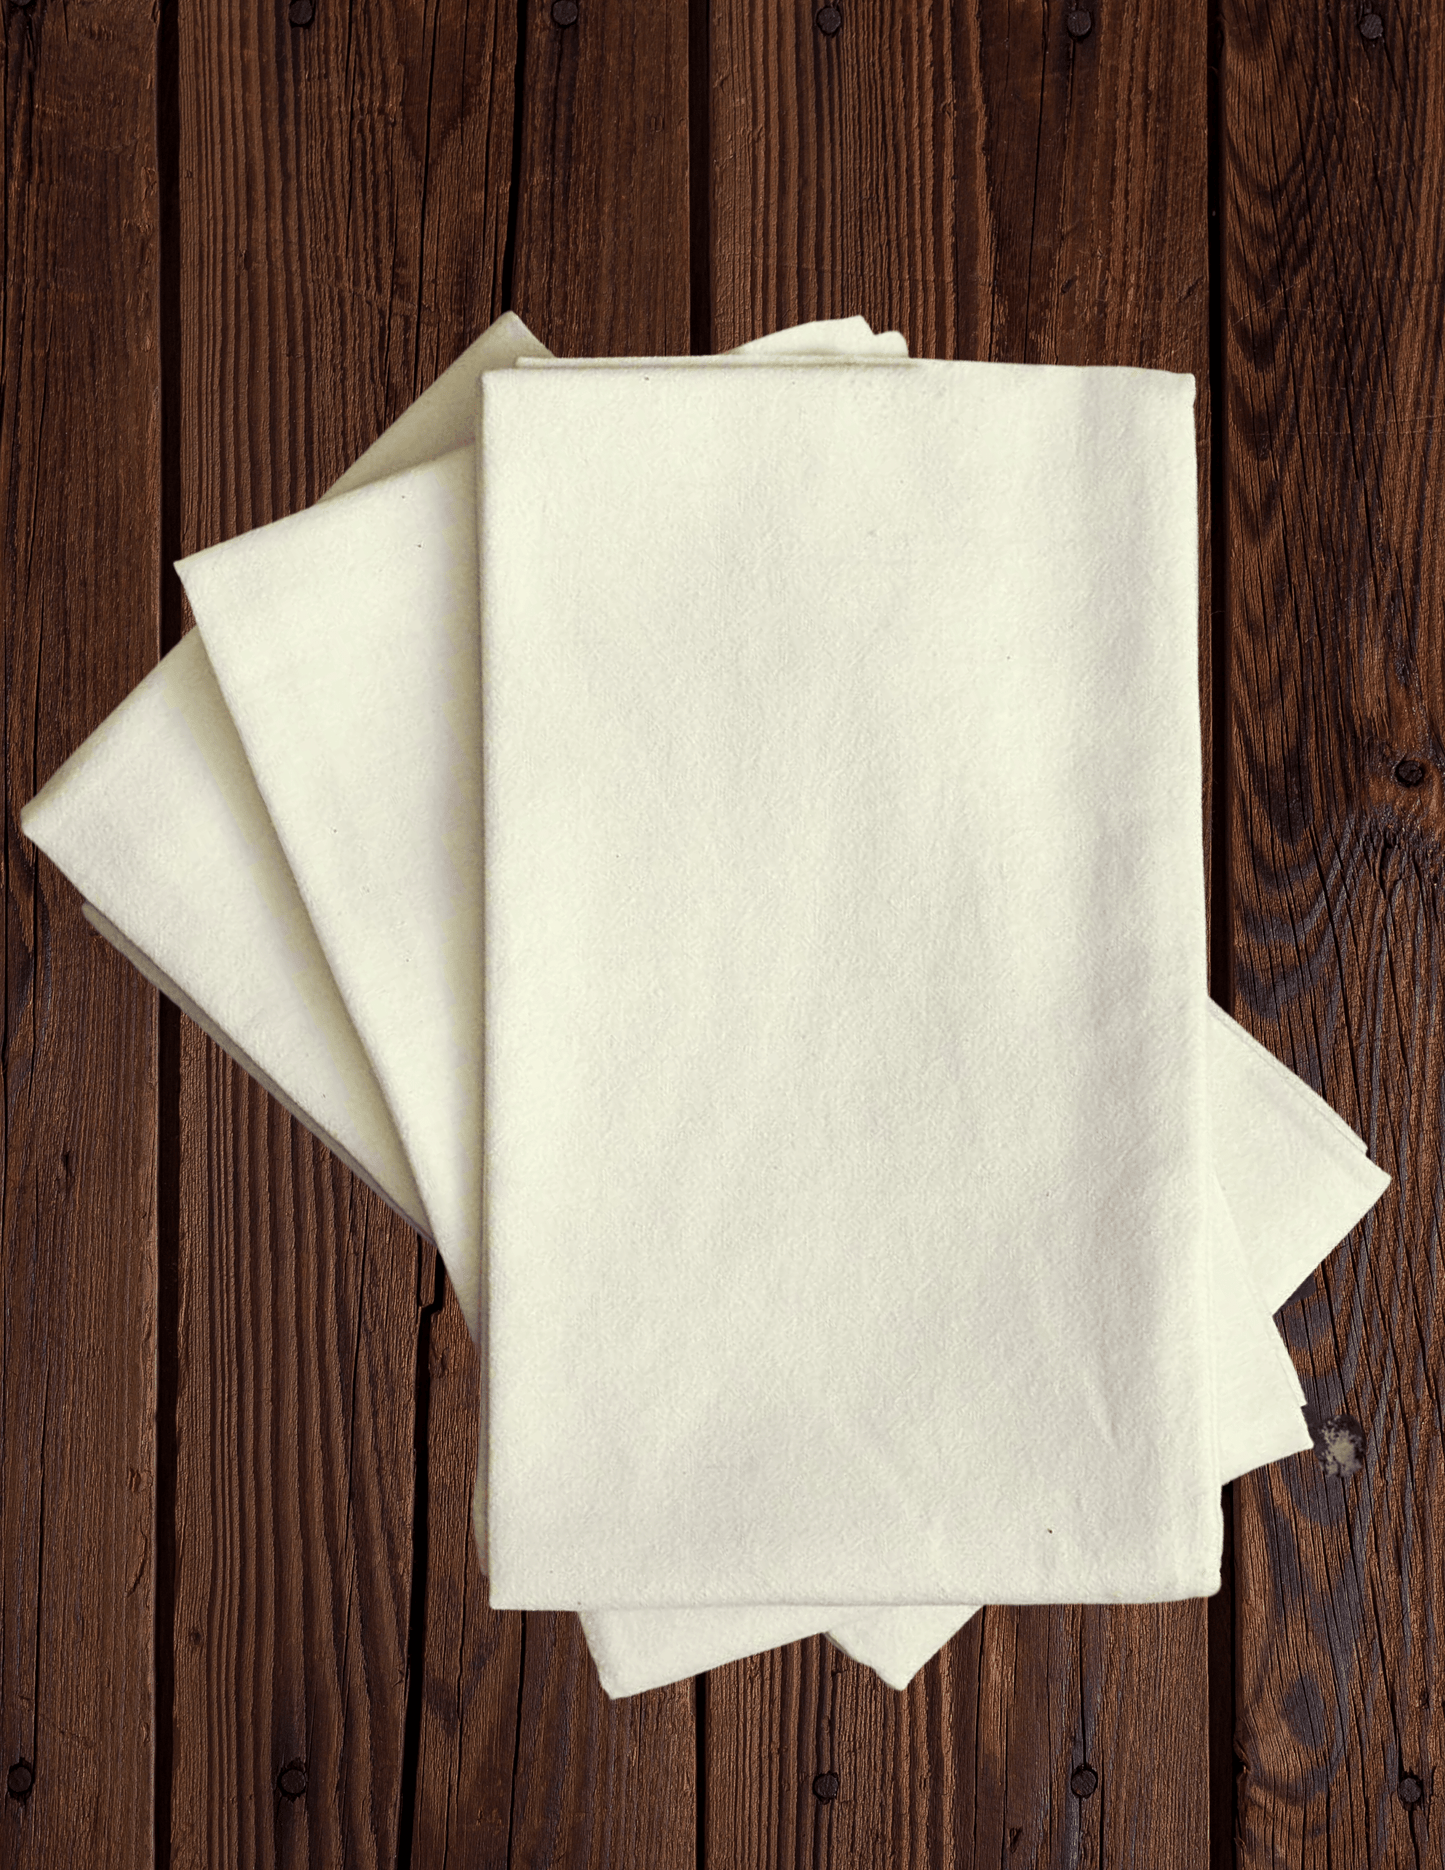 Herb Collection (Rosemary) - Tea Towel